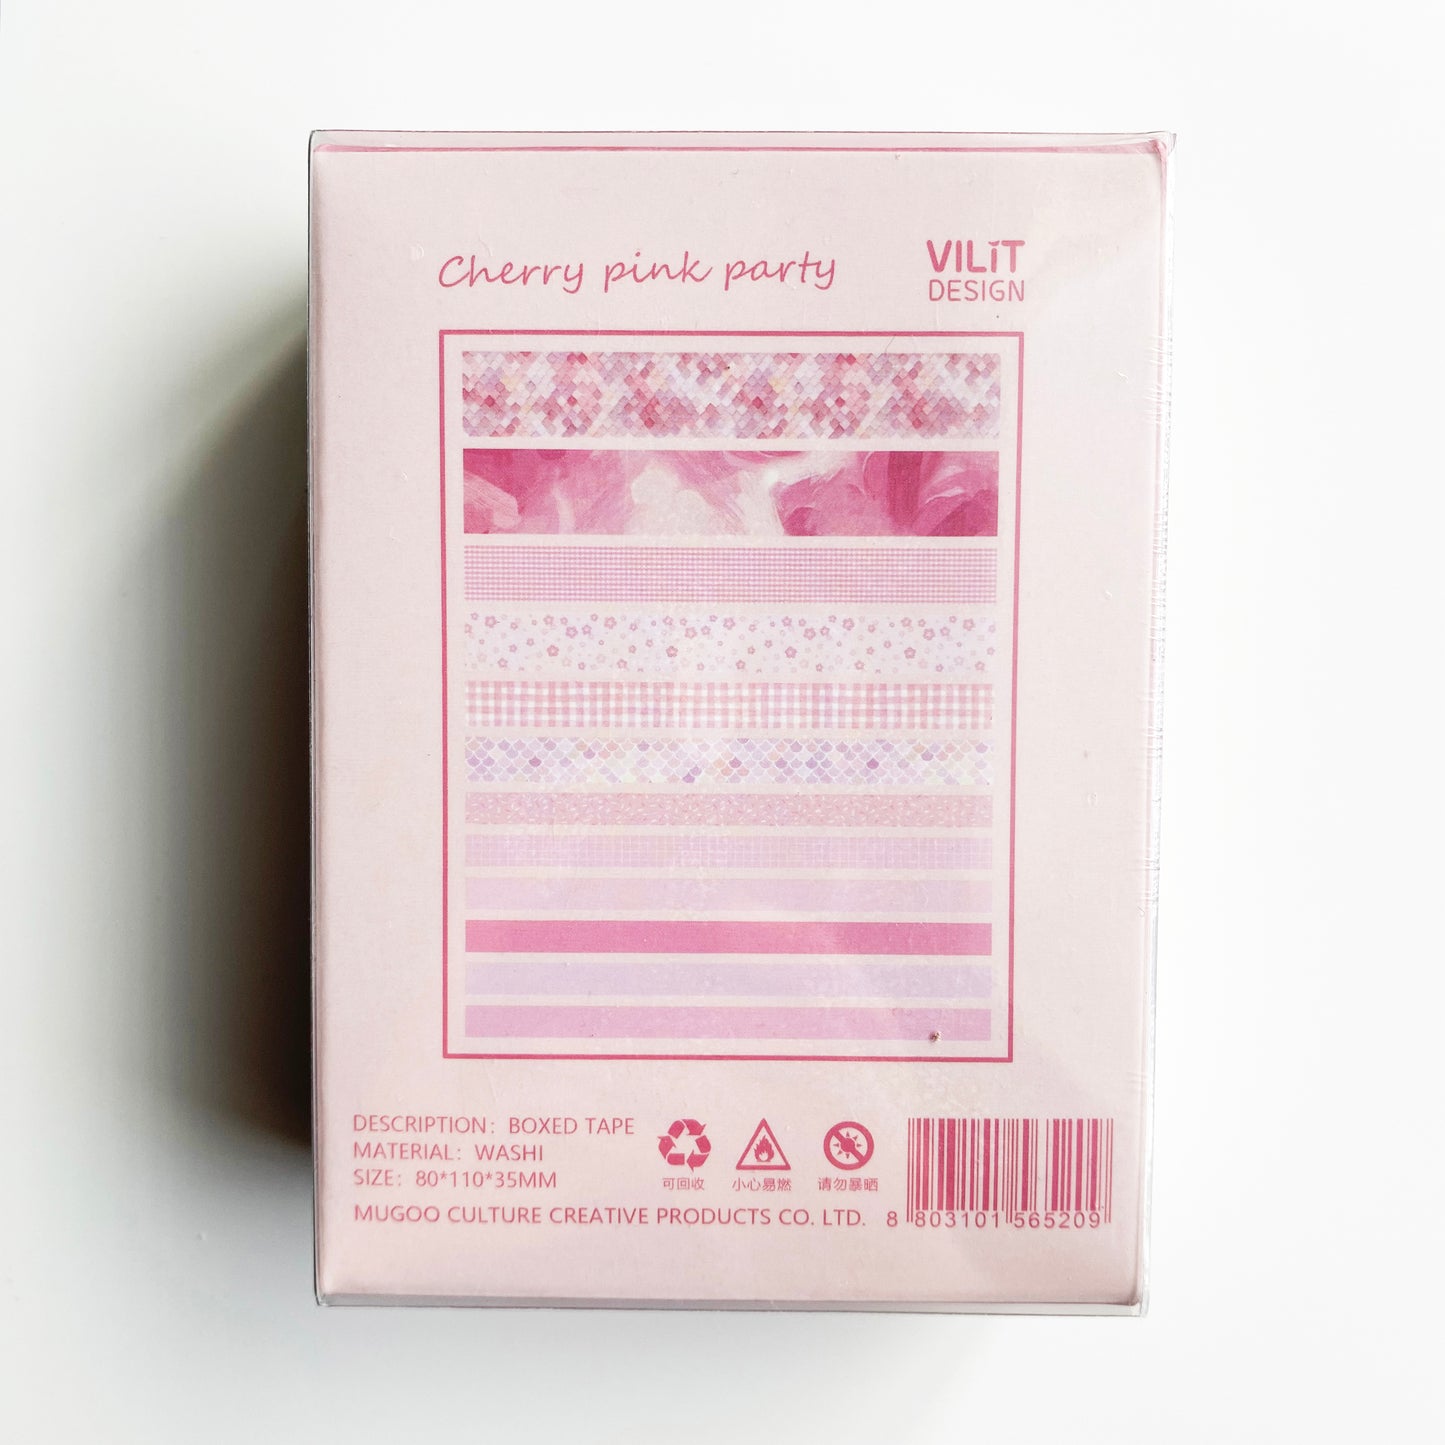 A7_Cherry Pink Party _12 rolls Washi tape set